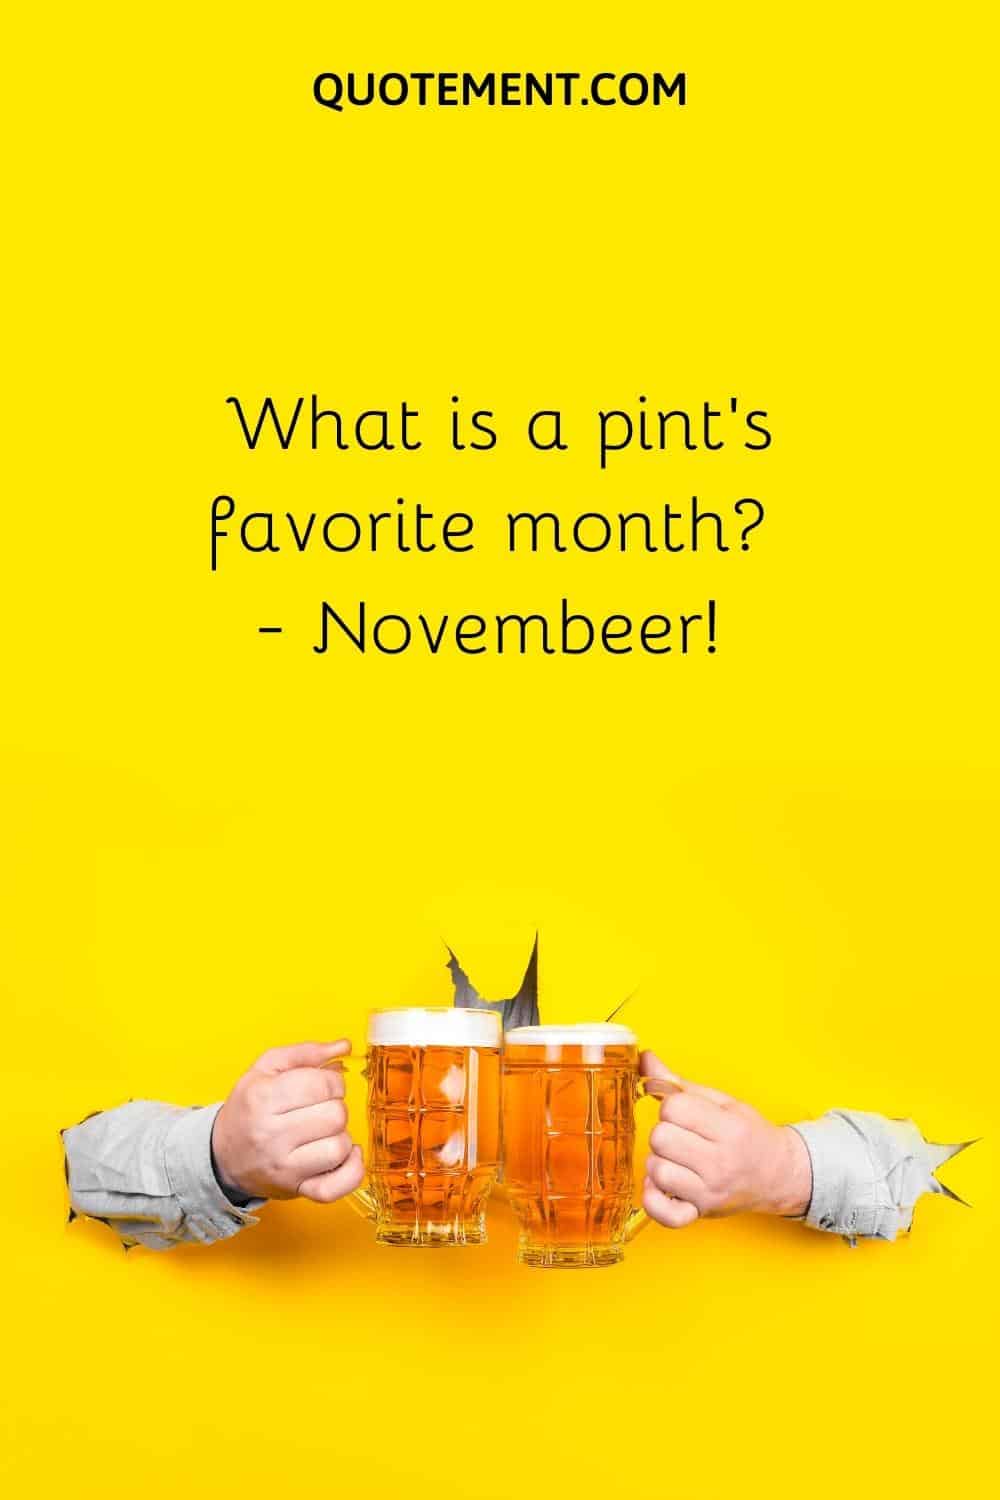 What is a pint’s favorite month - Novembeer!